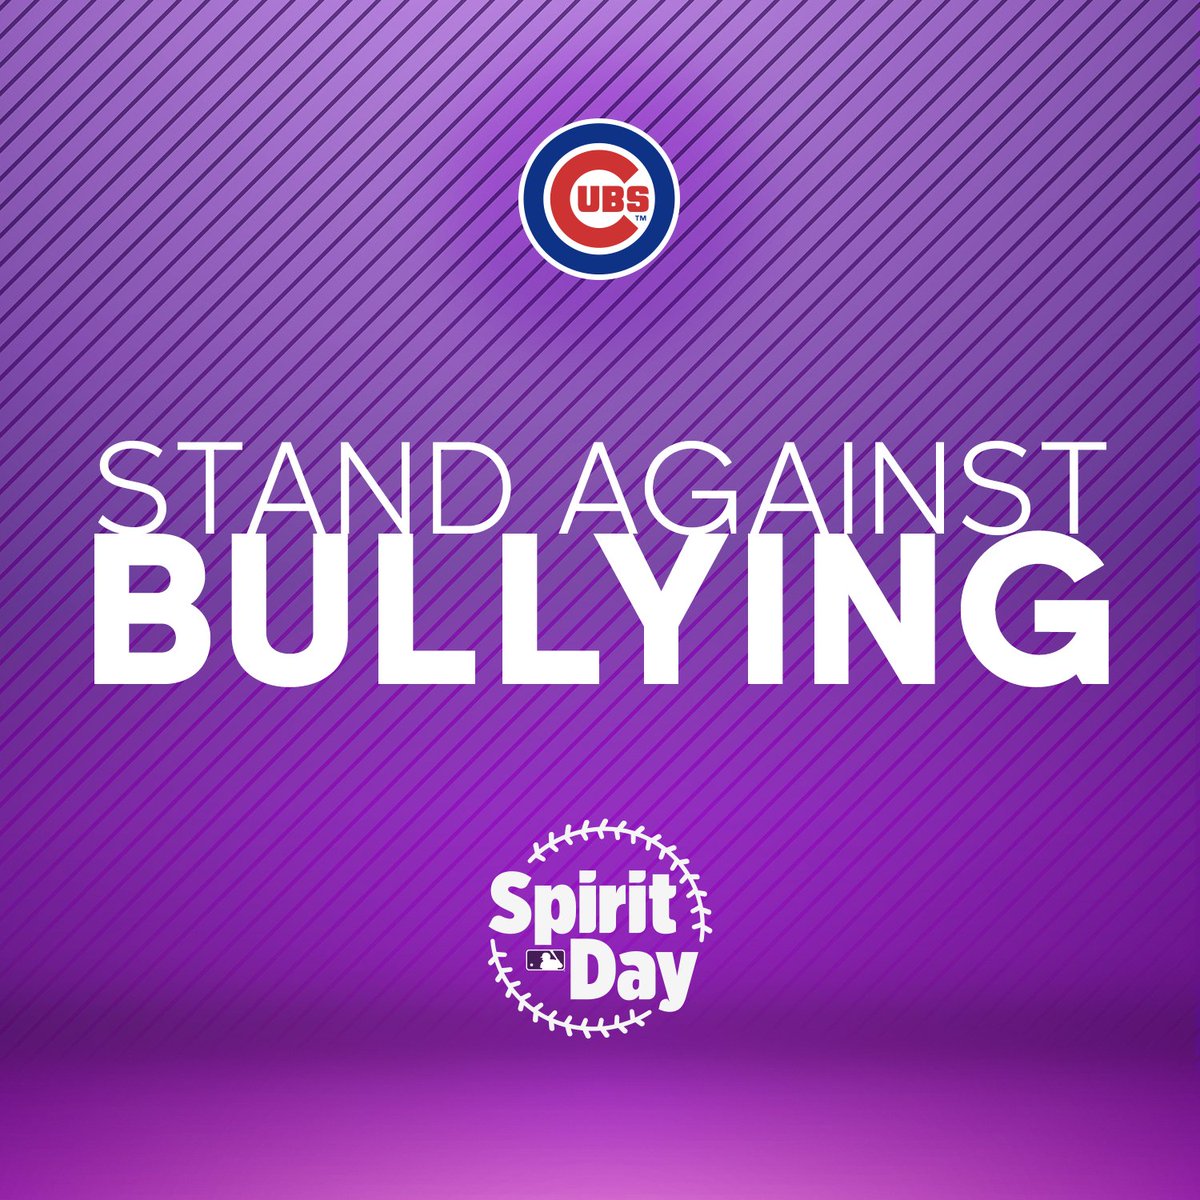 Today and every day, we are proud to support our LGBTQ community. 💜 Join us this #SpiritDay by donating to organizations like @glaad, volunteering with the @TrevorProject or @CenteronHalsted and taking the pledge to stand against bullying: glaad.org/spiritday